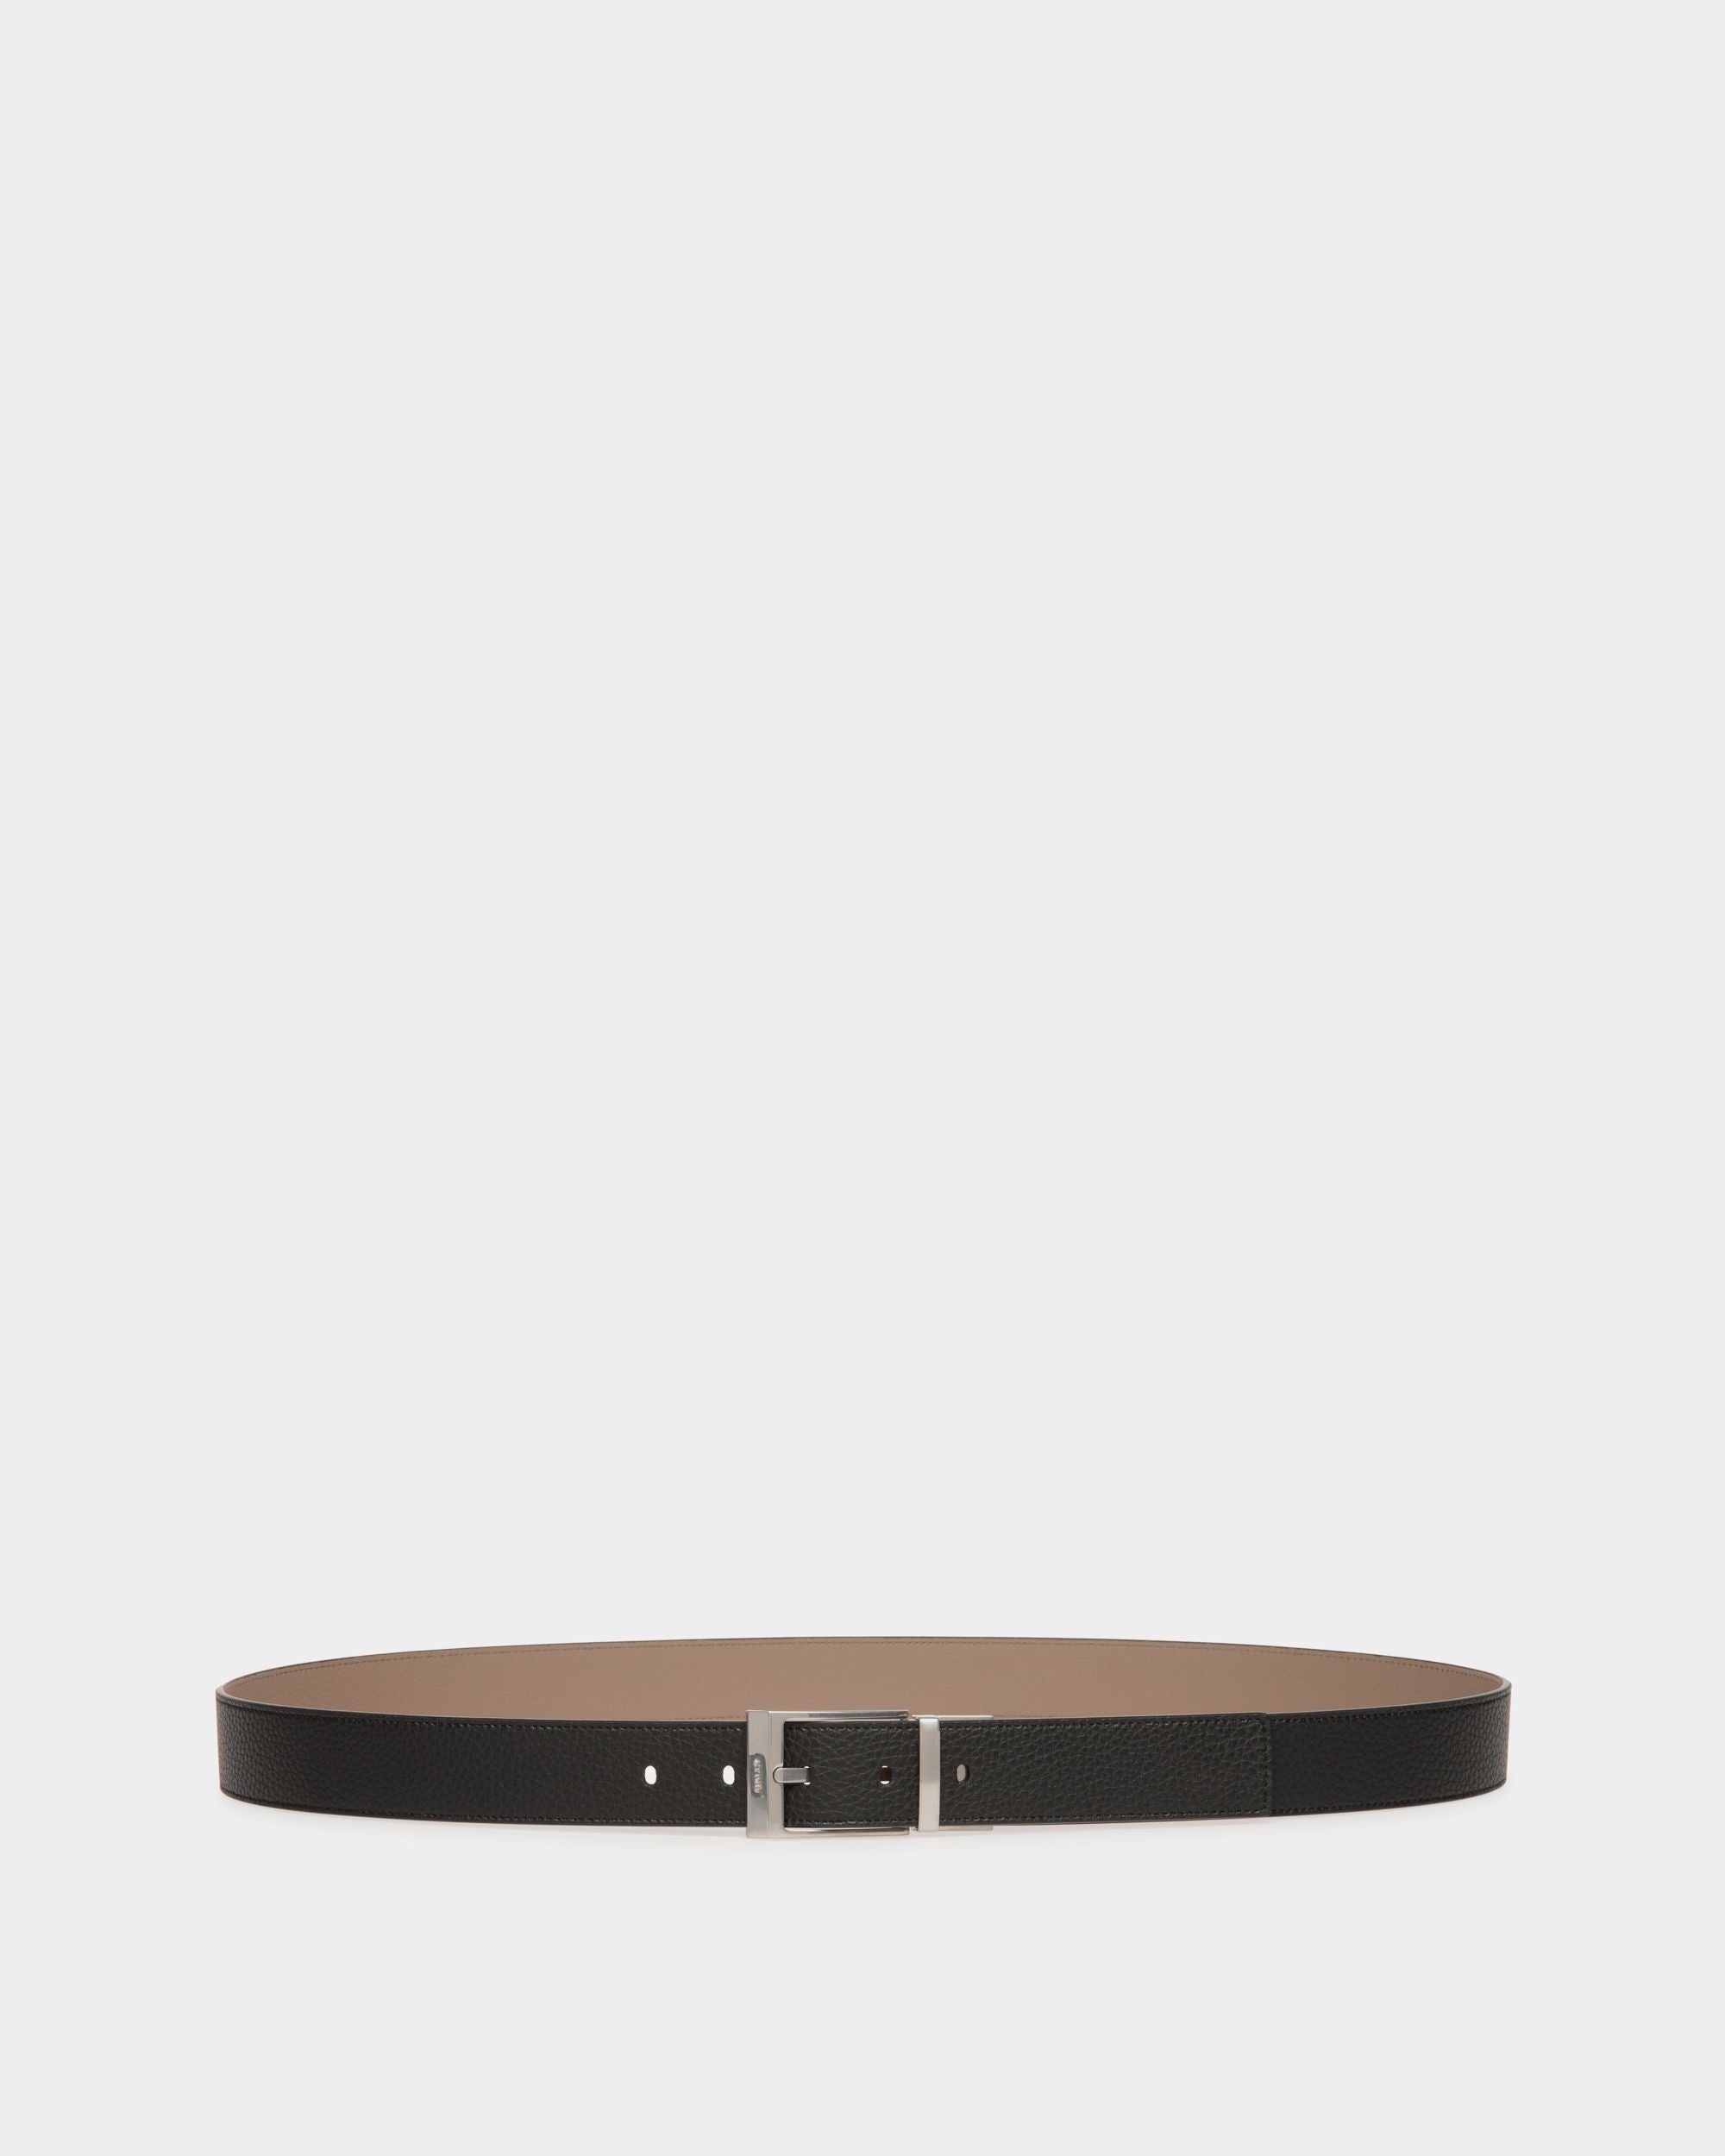 Shiffie 35mm | Men's Reversible And Adjustable Belt in Black And Beige Leather| Bally | Still Life Front